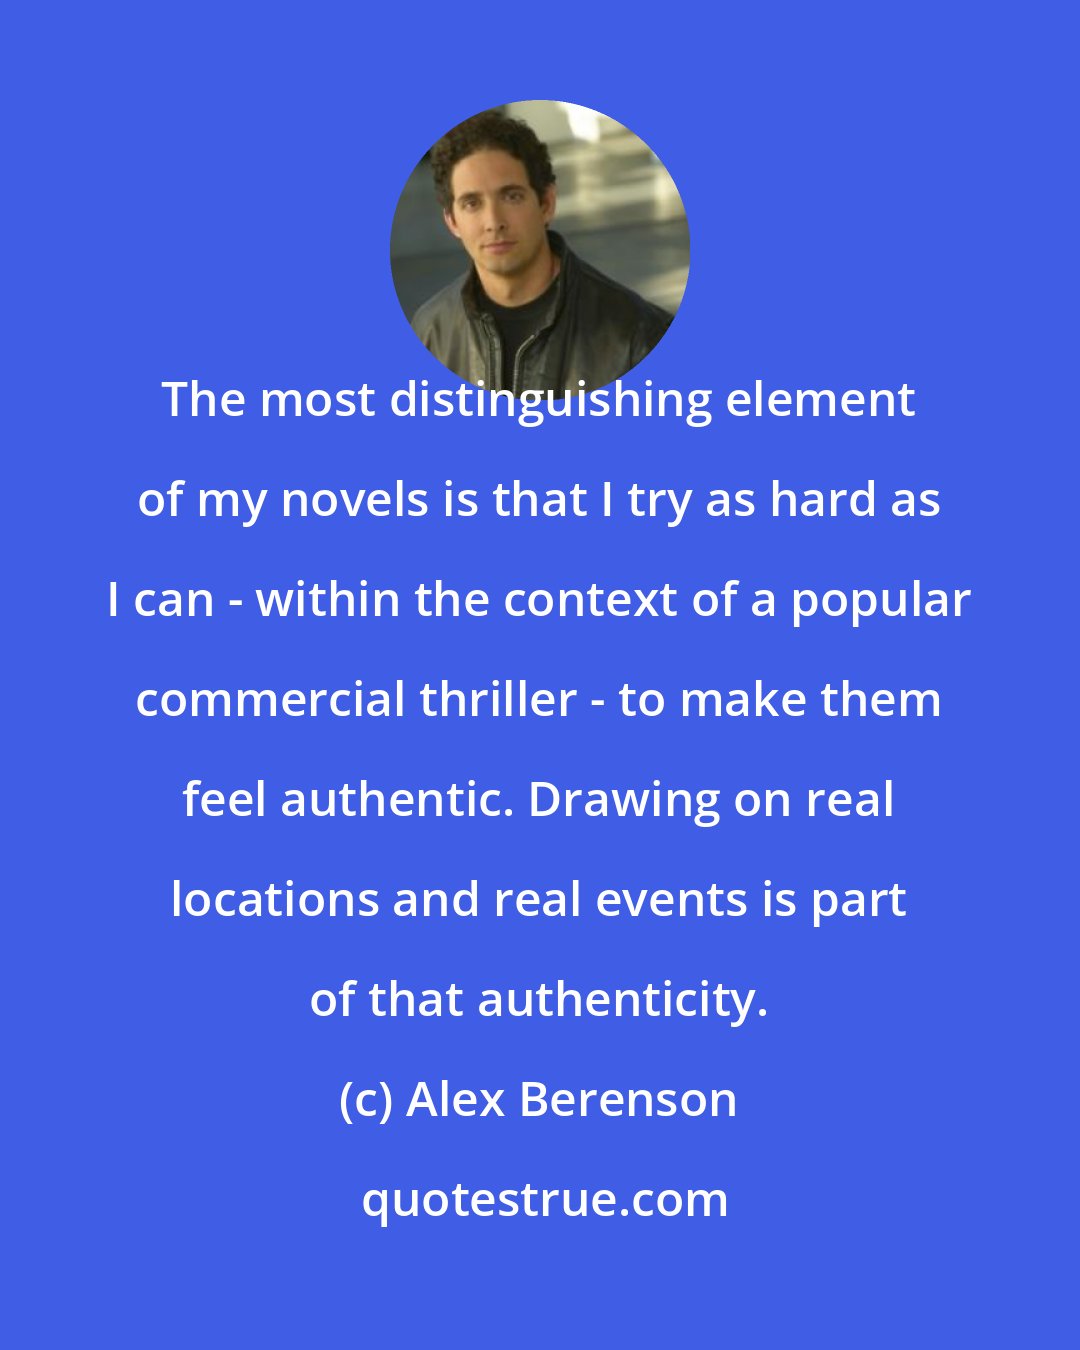 Alex Berenson: The most distinguishing element of my novels is that I try as hard as I can - within the context of a popular commercial thriller - to make them feel authentic. Drawing on real locations and real events is part of that authenticity.